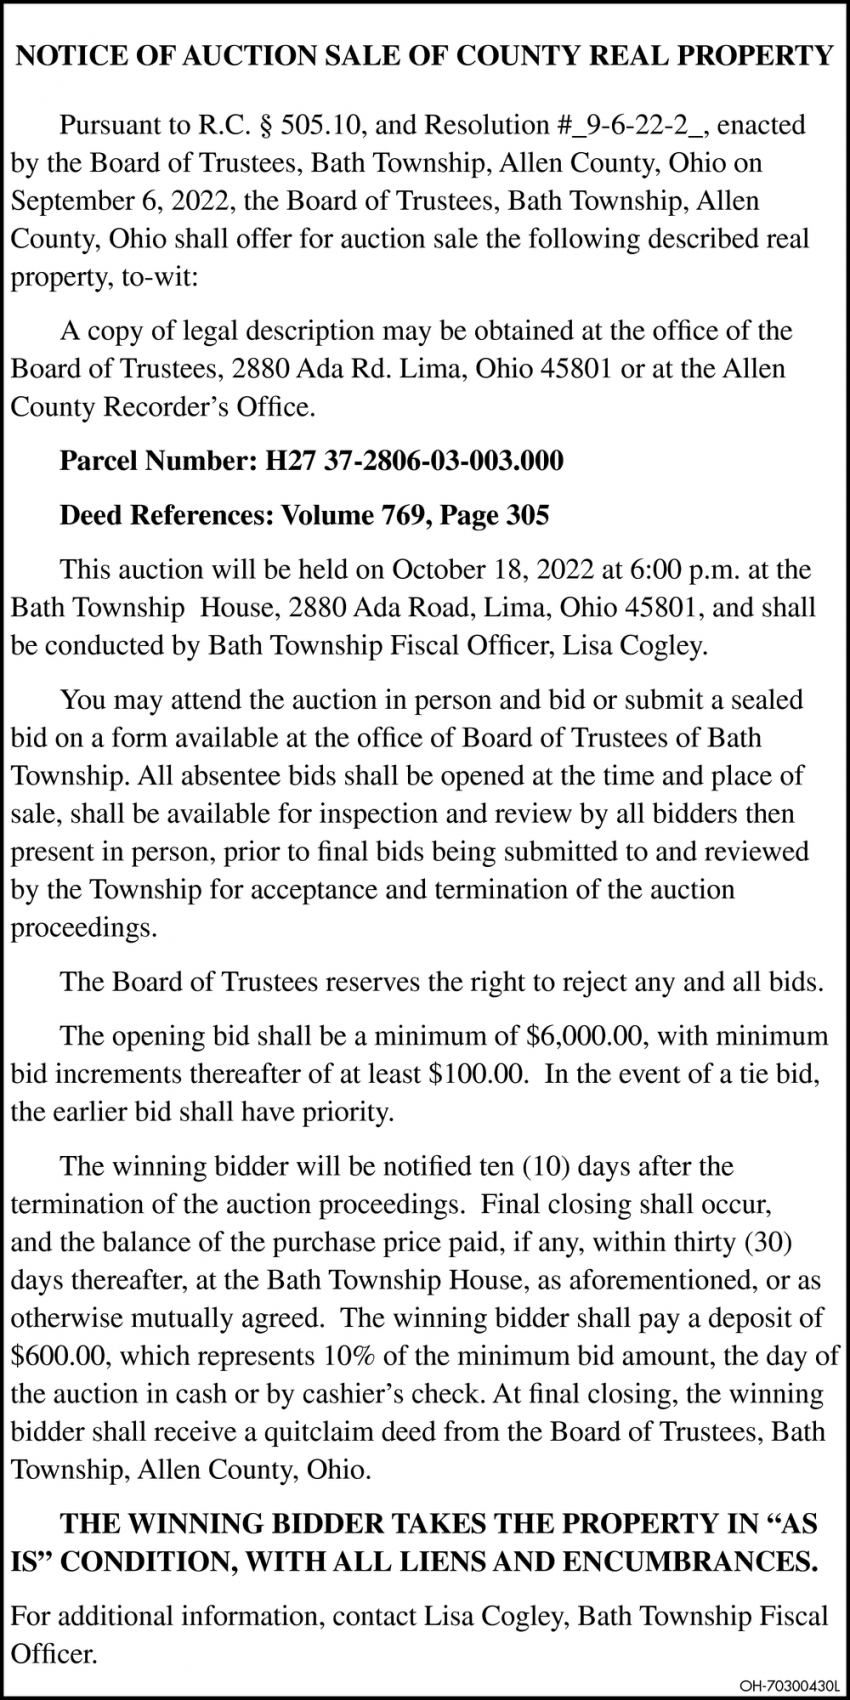 Notice of Auction Sale of County Real Property